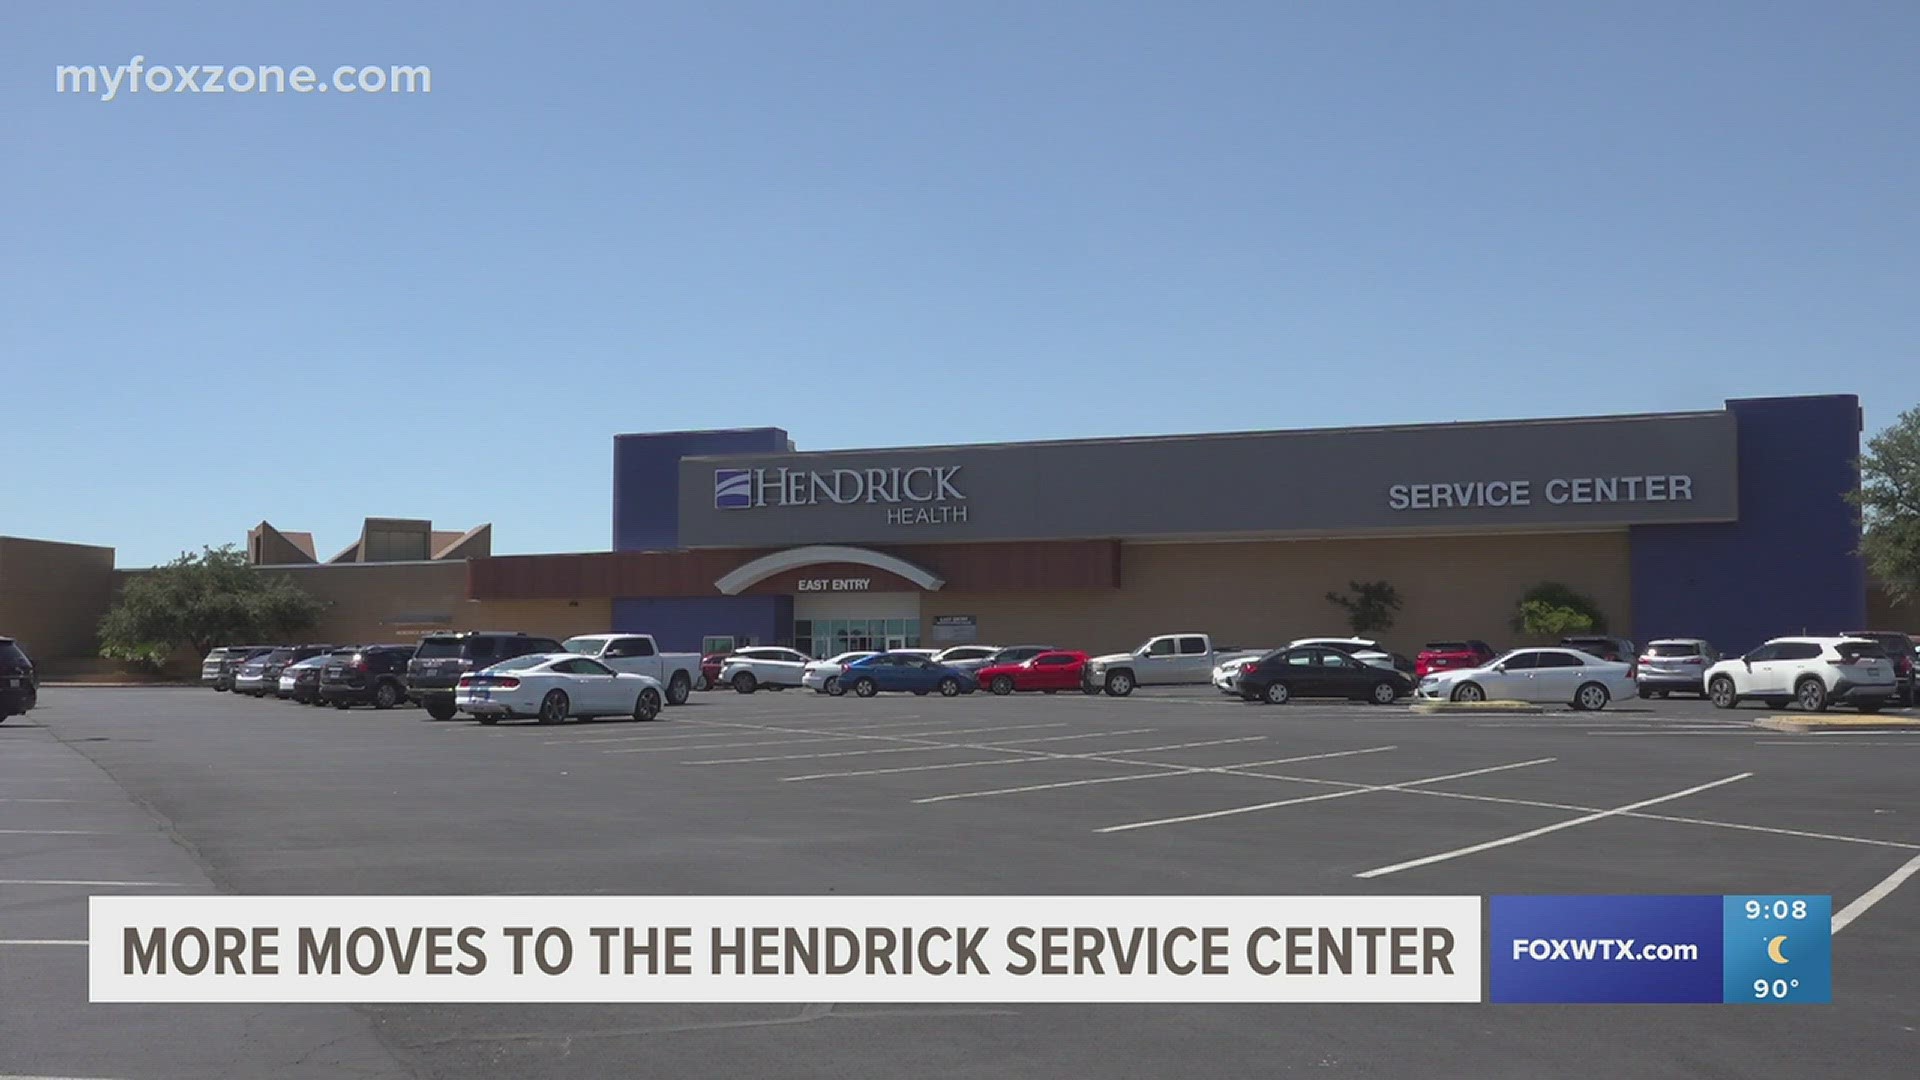 Thursday, Sept. 7, multiple customer service departments move into the Hendrick Service Center at the Mall of Abilene.